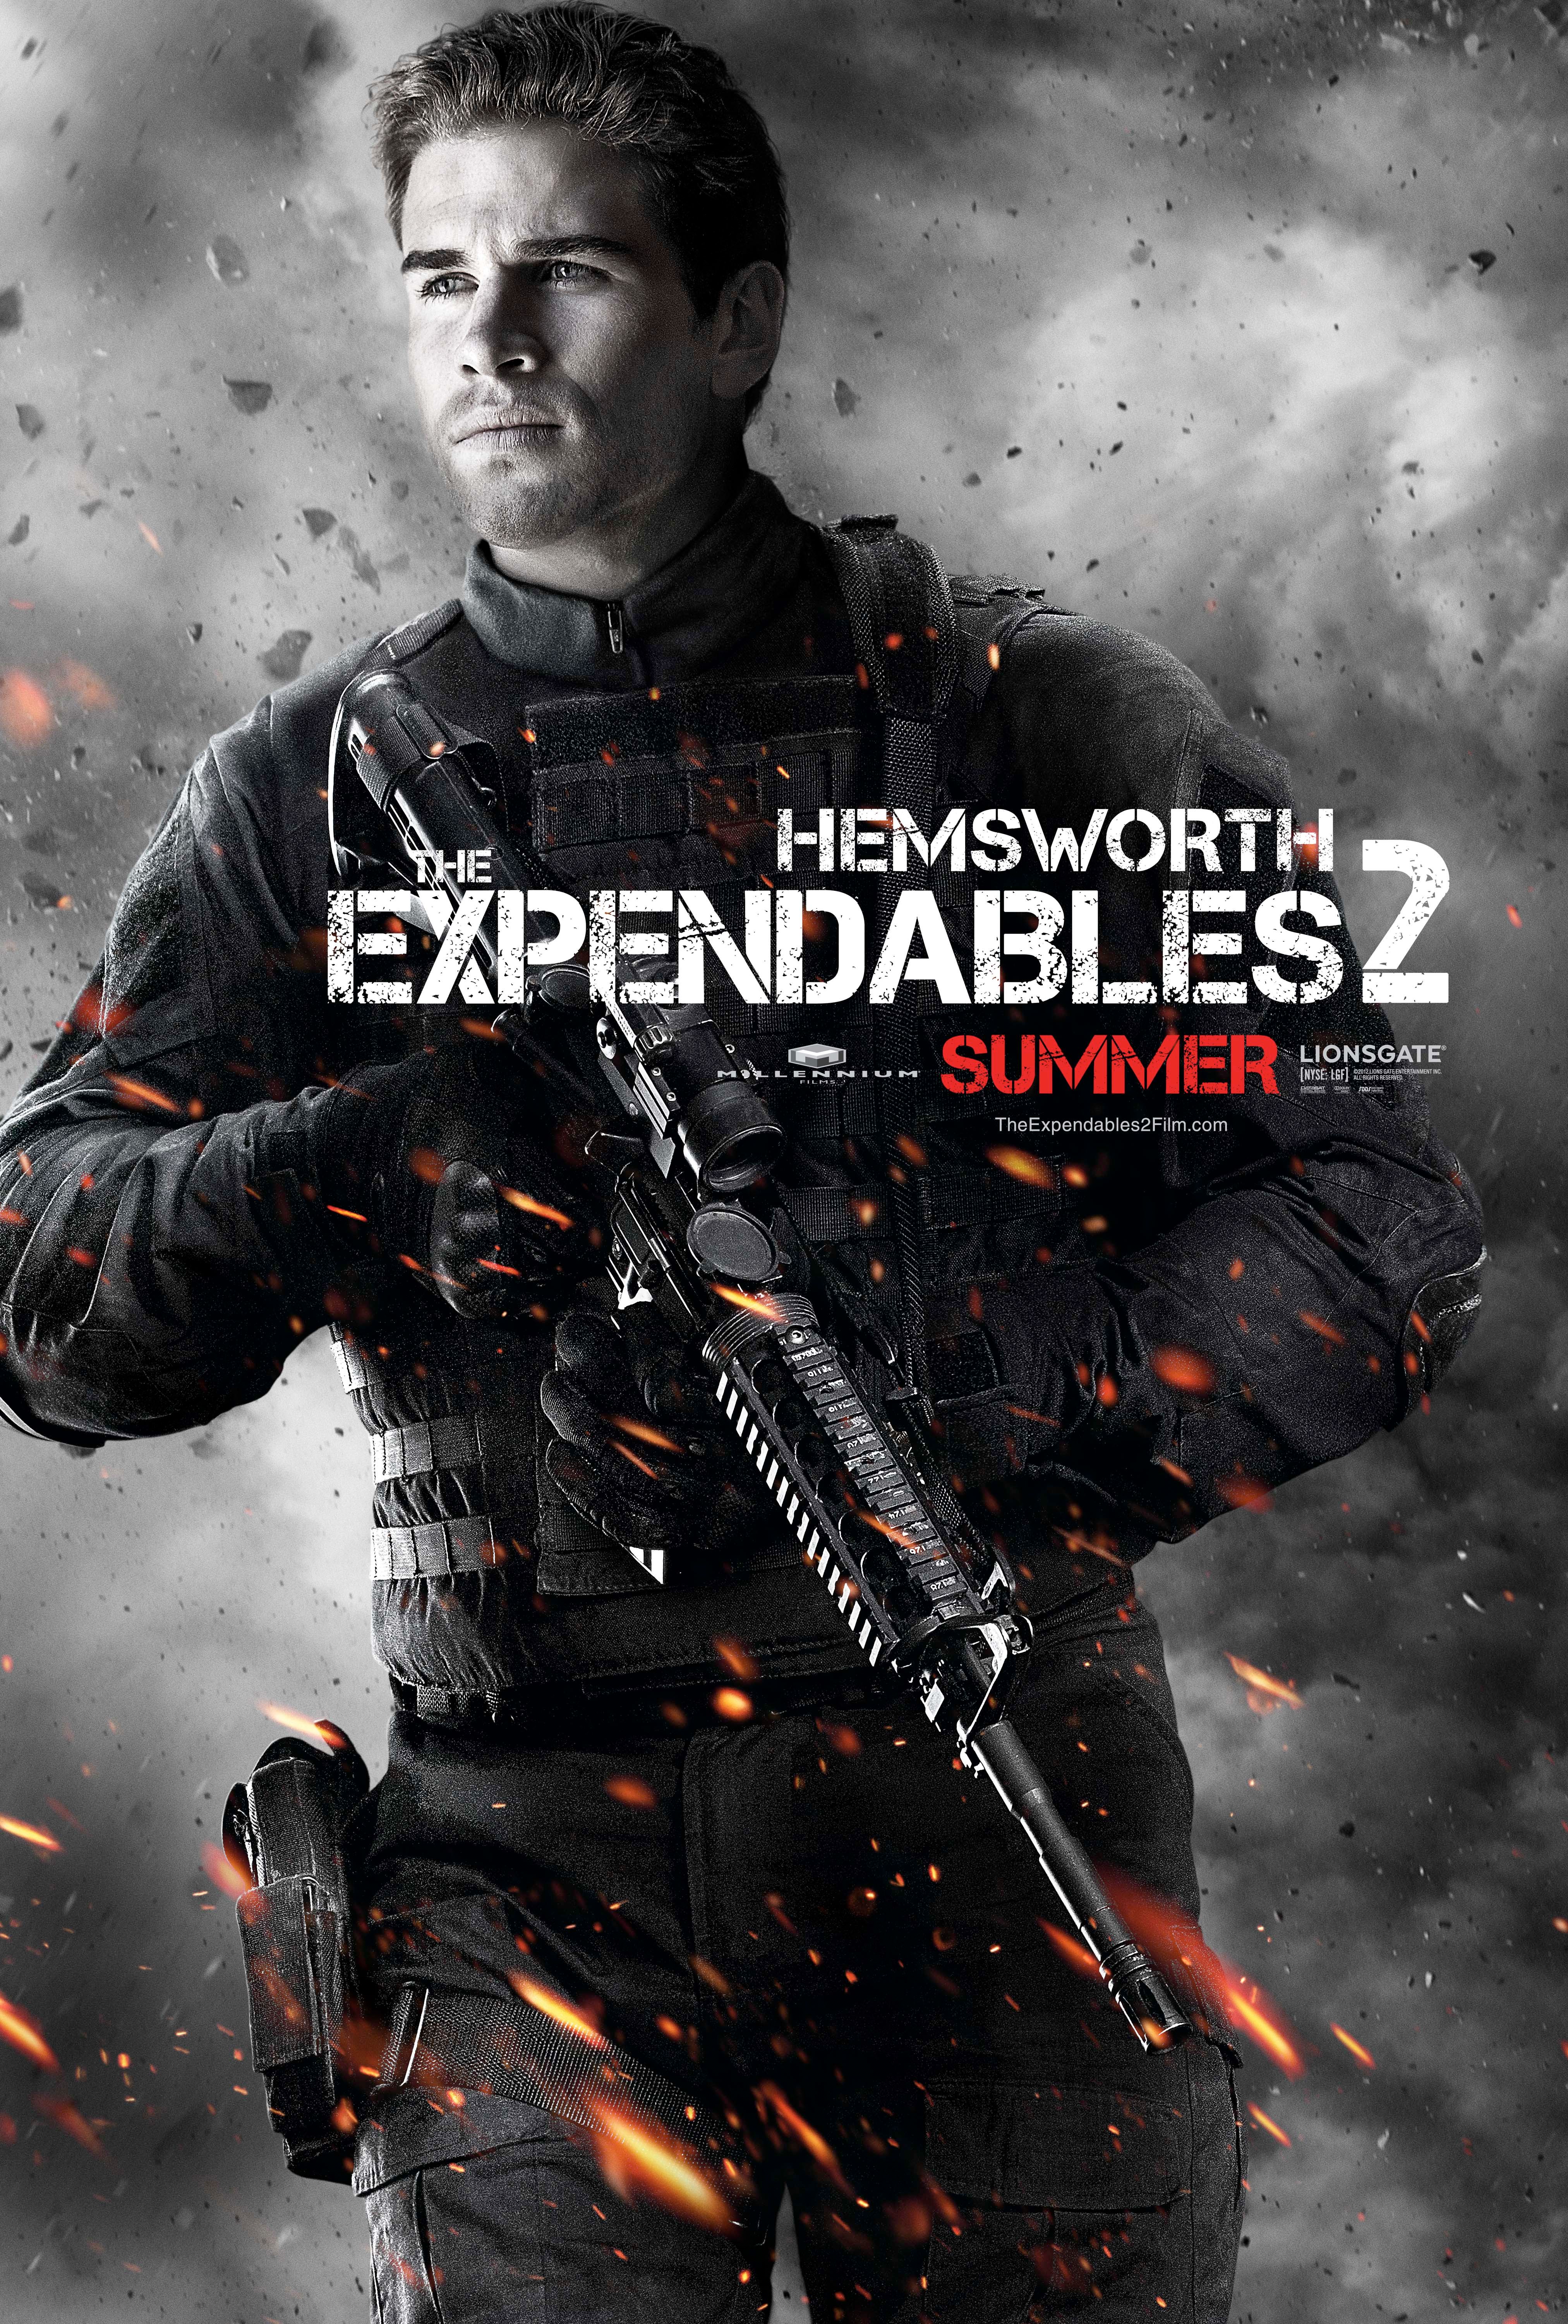 The Expendables 2 Character Poser #12